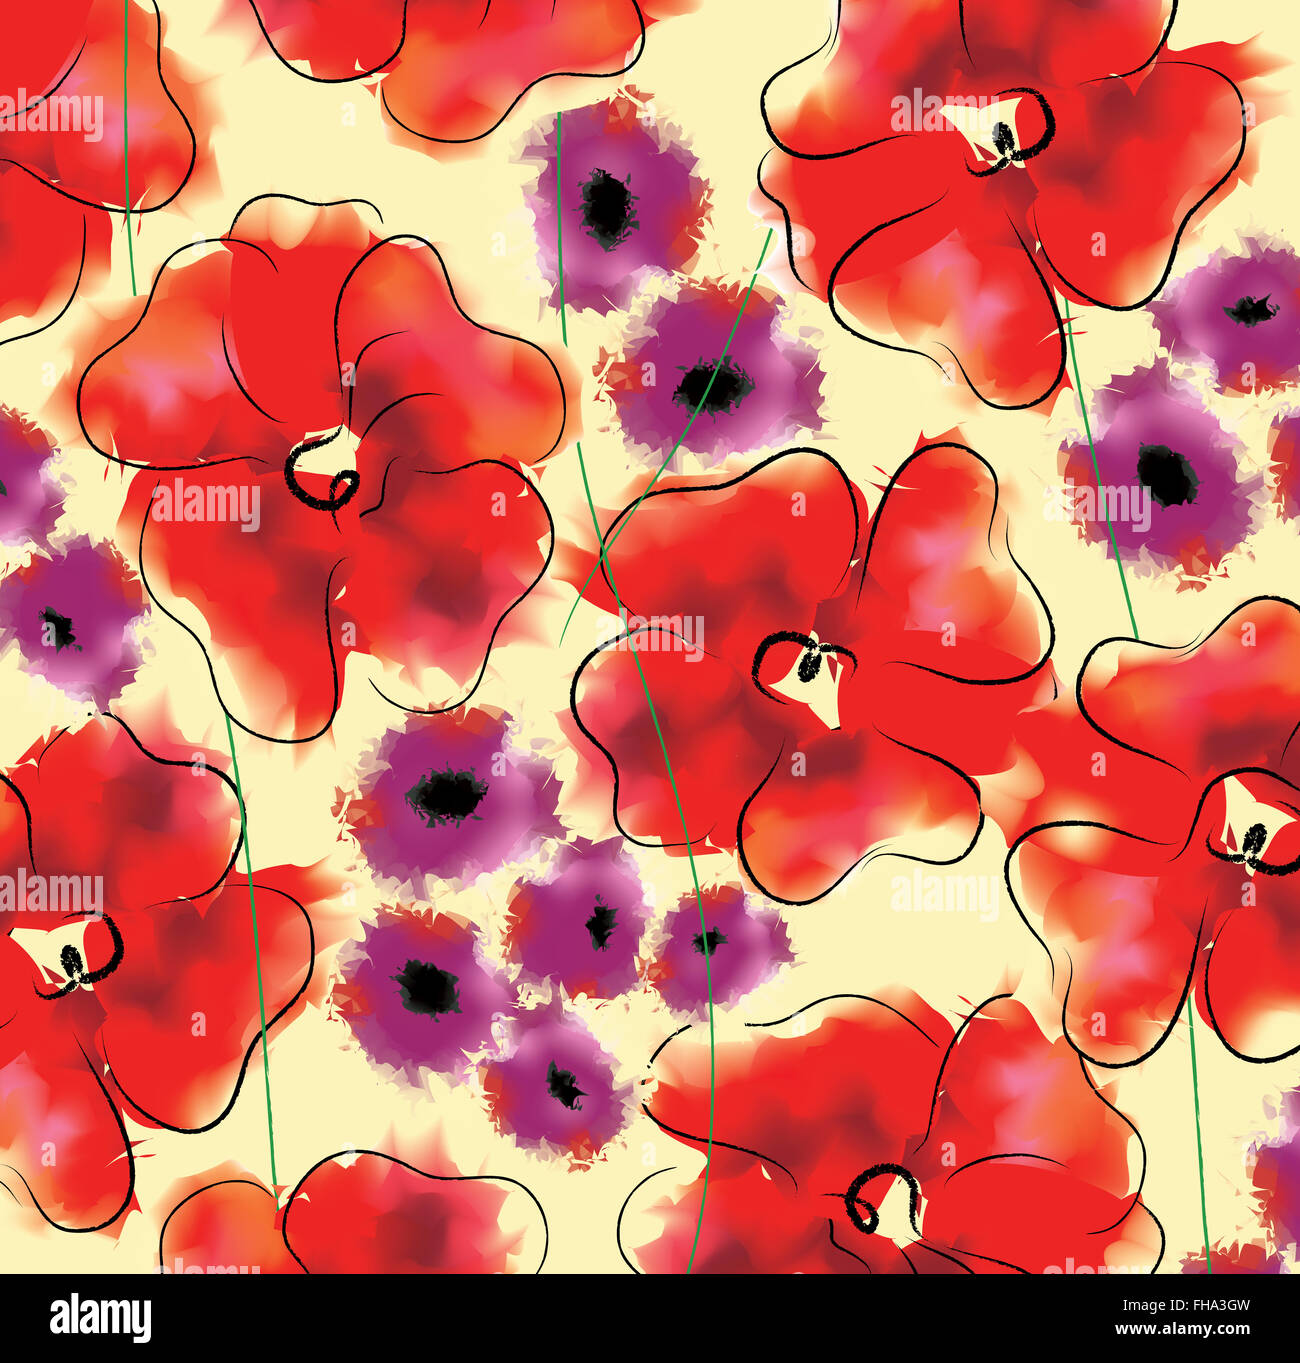 Adonis and gloxinia floral pattern. Large size Stock Photo